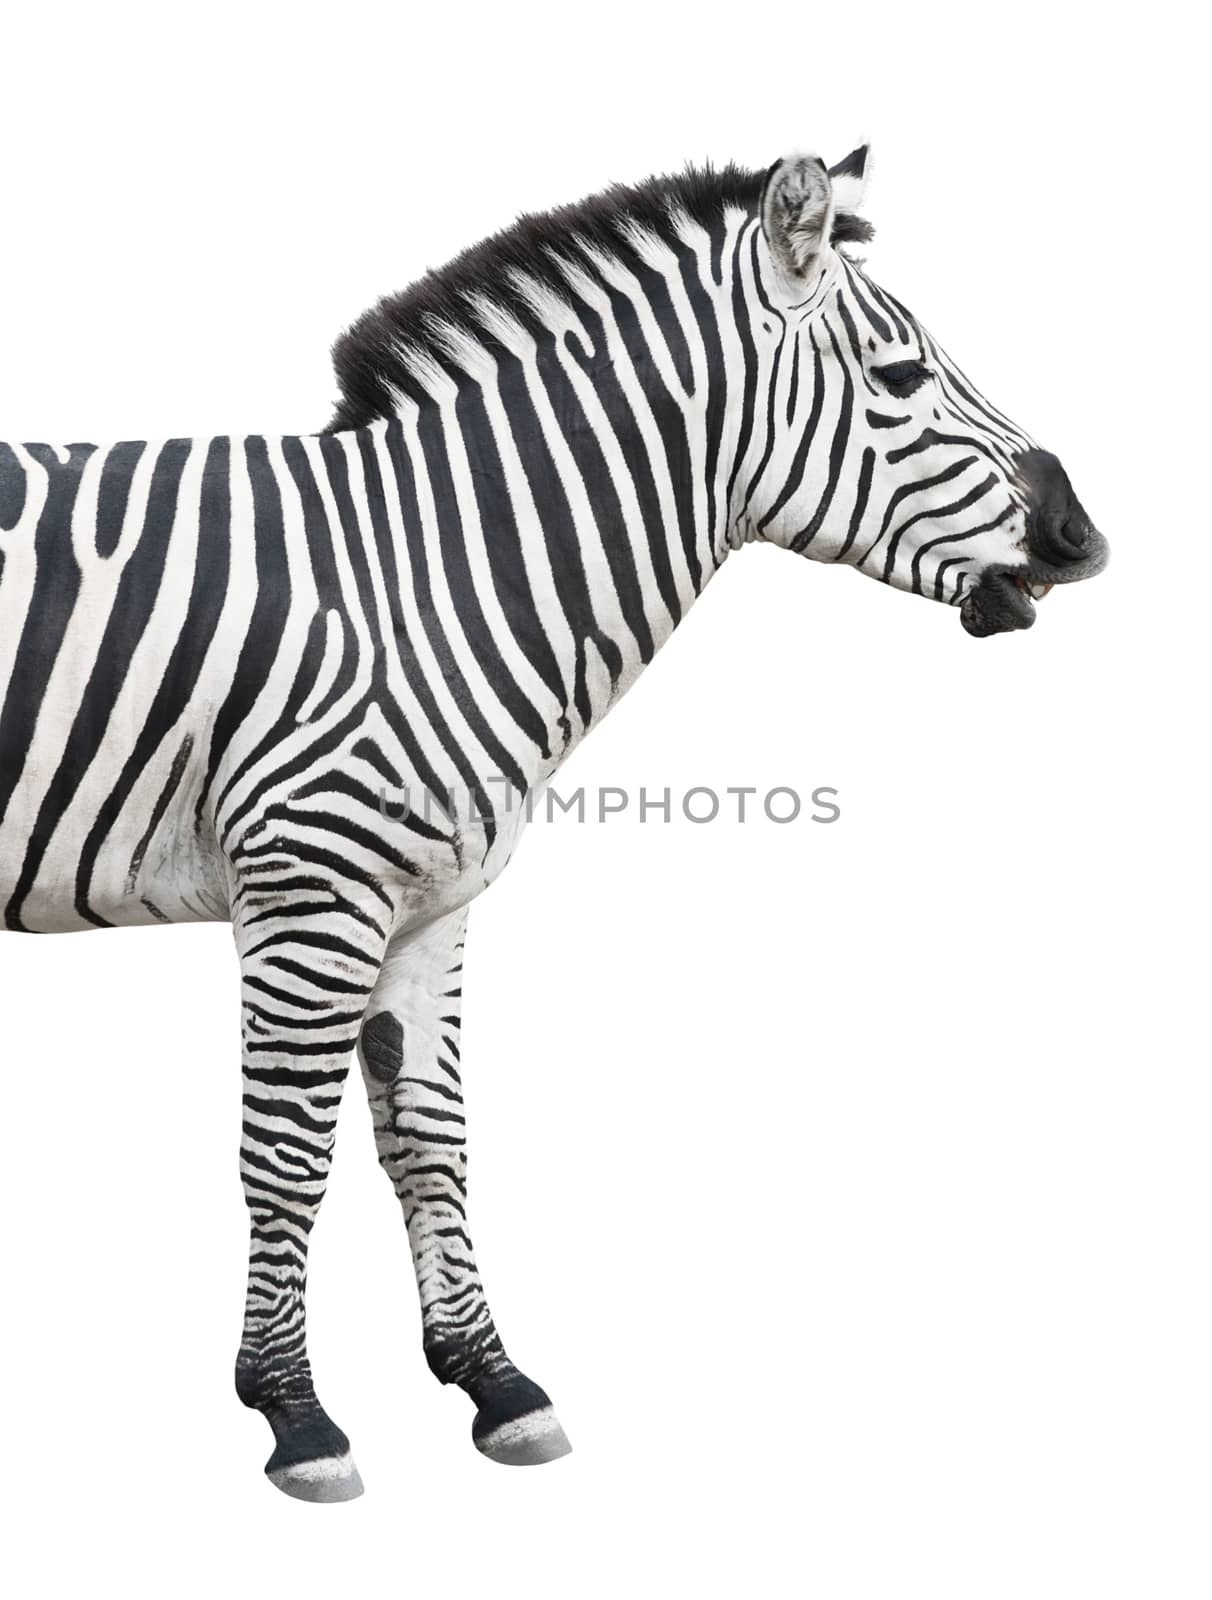 Zebra isolated on white background. It looks like talking or smiling. With clipping path.